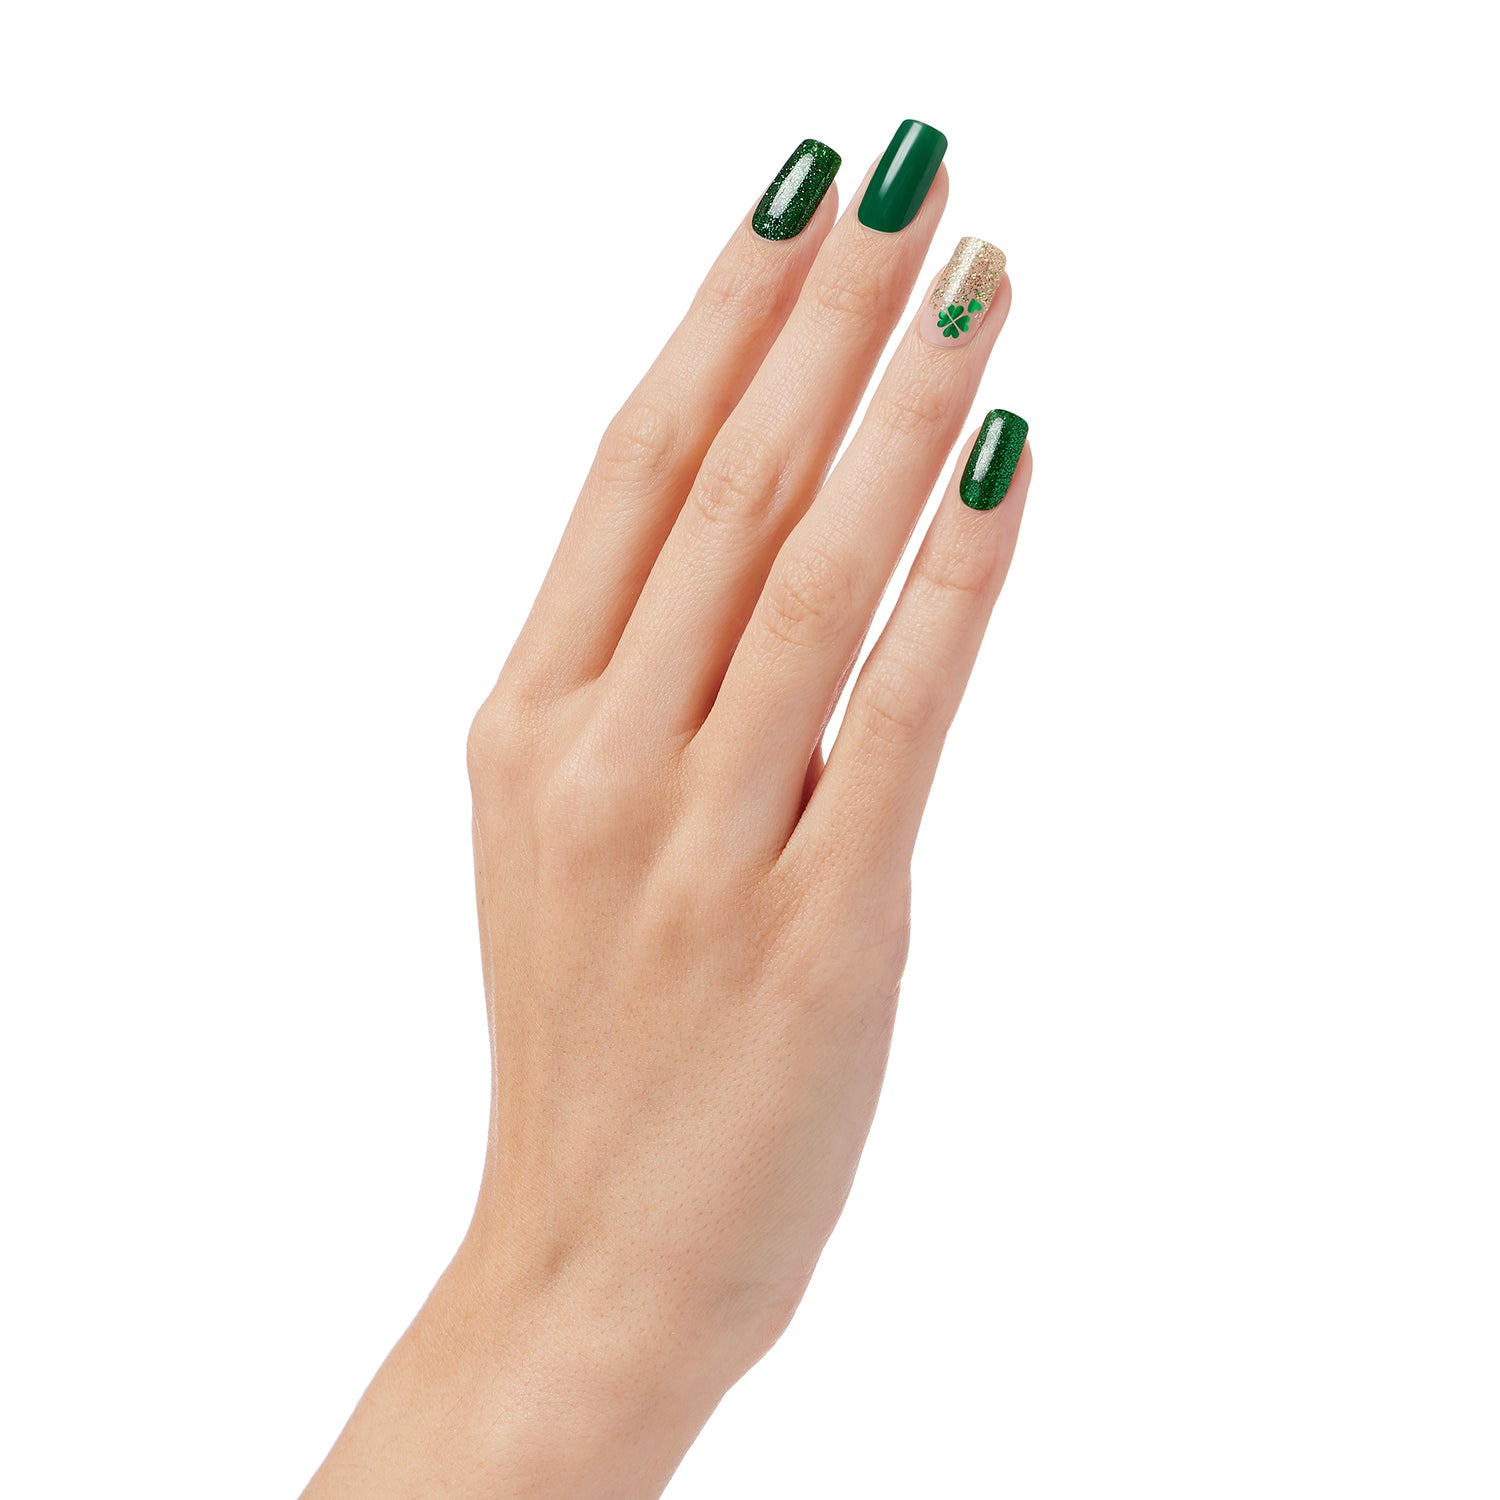 Eat, drink, and be merry. 🍀 Sheer nude & green gel nail strips featuring green & gold glitter and metallic clover accents with a glossy, high-shine finish.